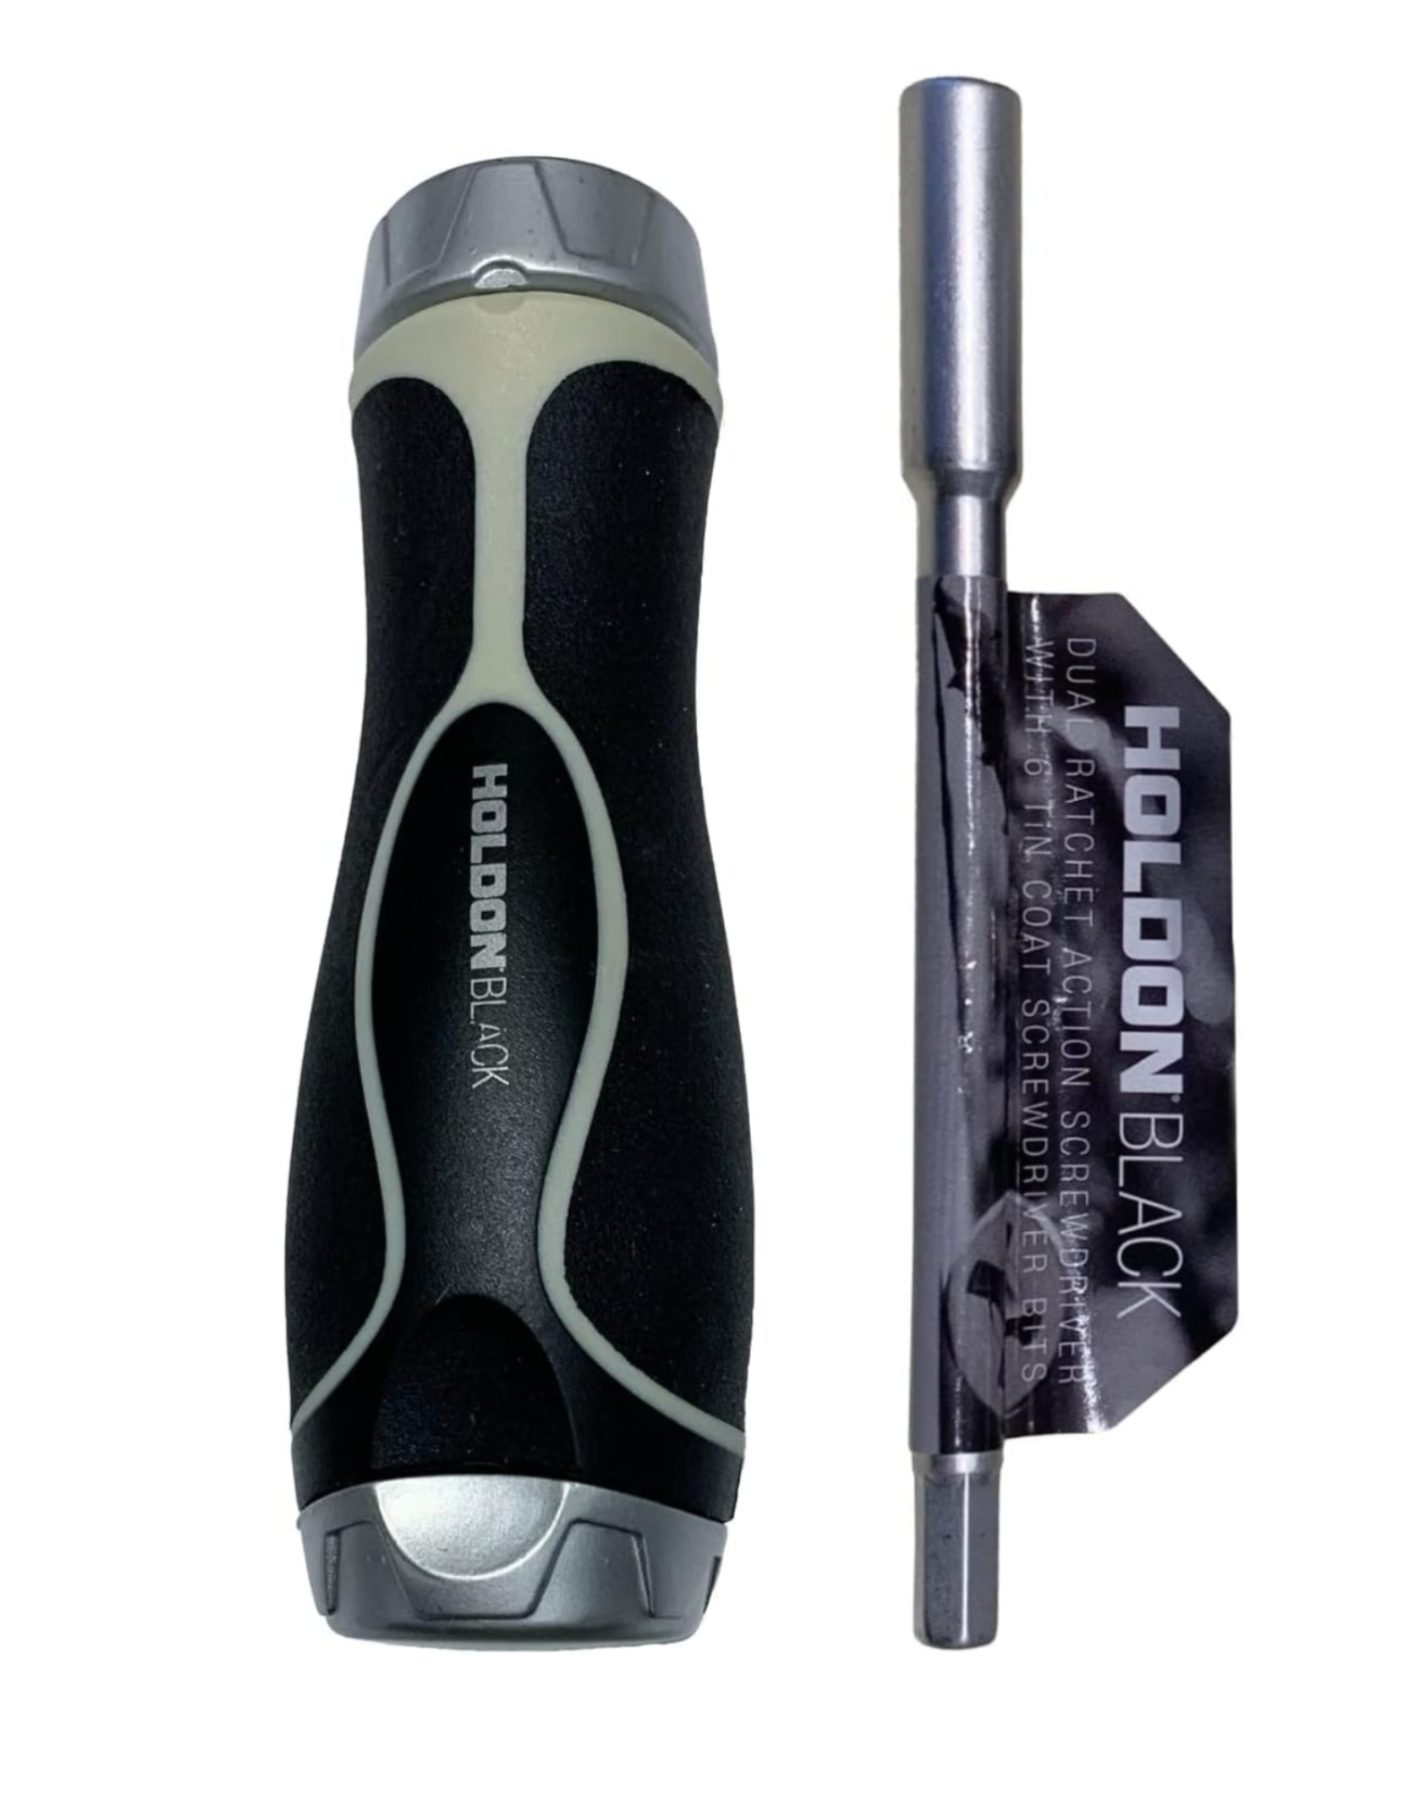 HOLDON BLACK 2 SPEED MAGNETIC RATCHET SCREWDRIVER WITH 6 PHILIPS SCREWDRIVER BITS INSIDE.